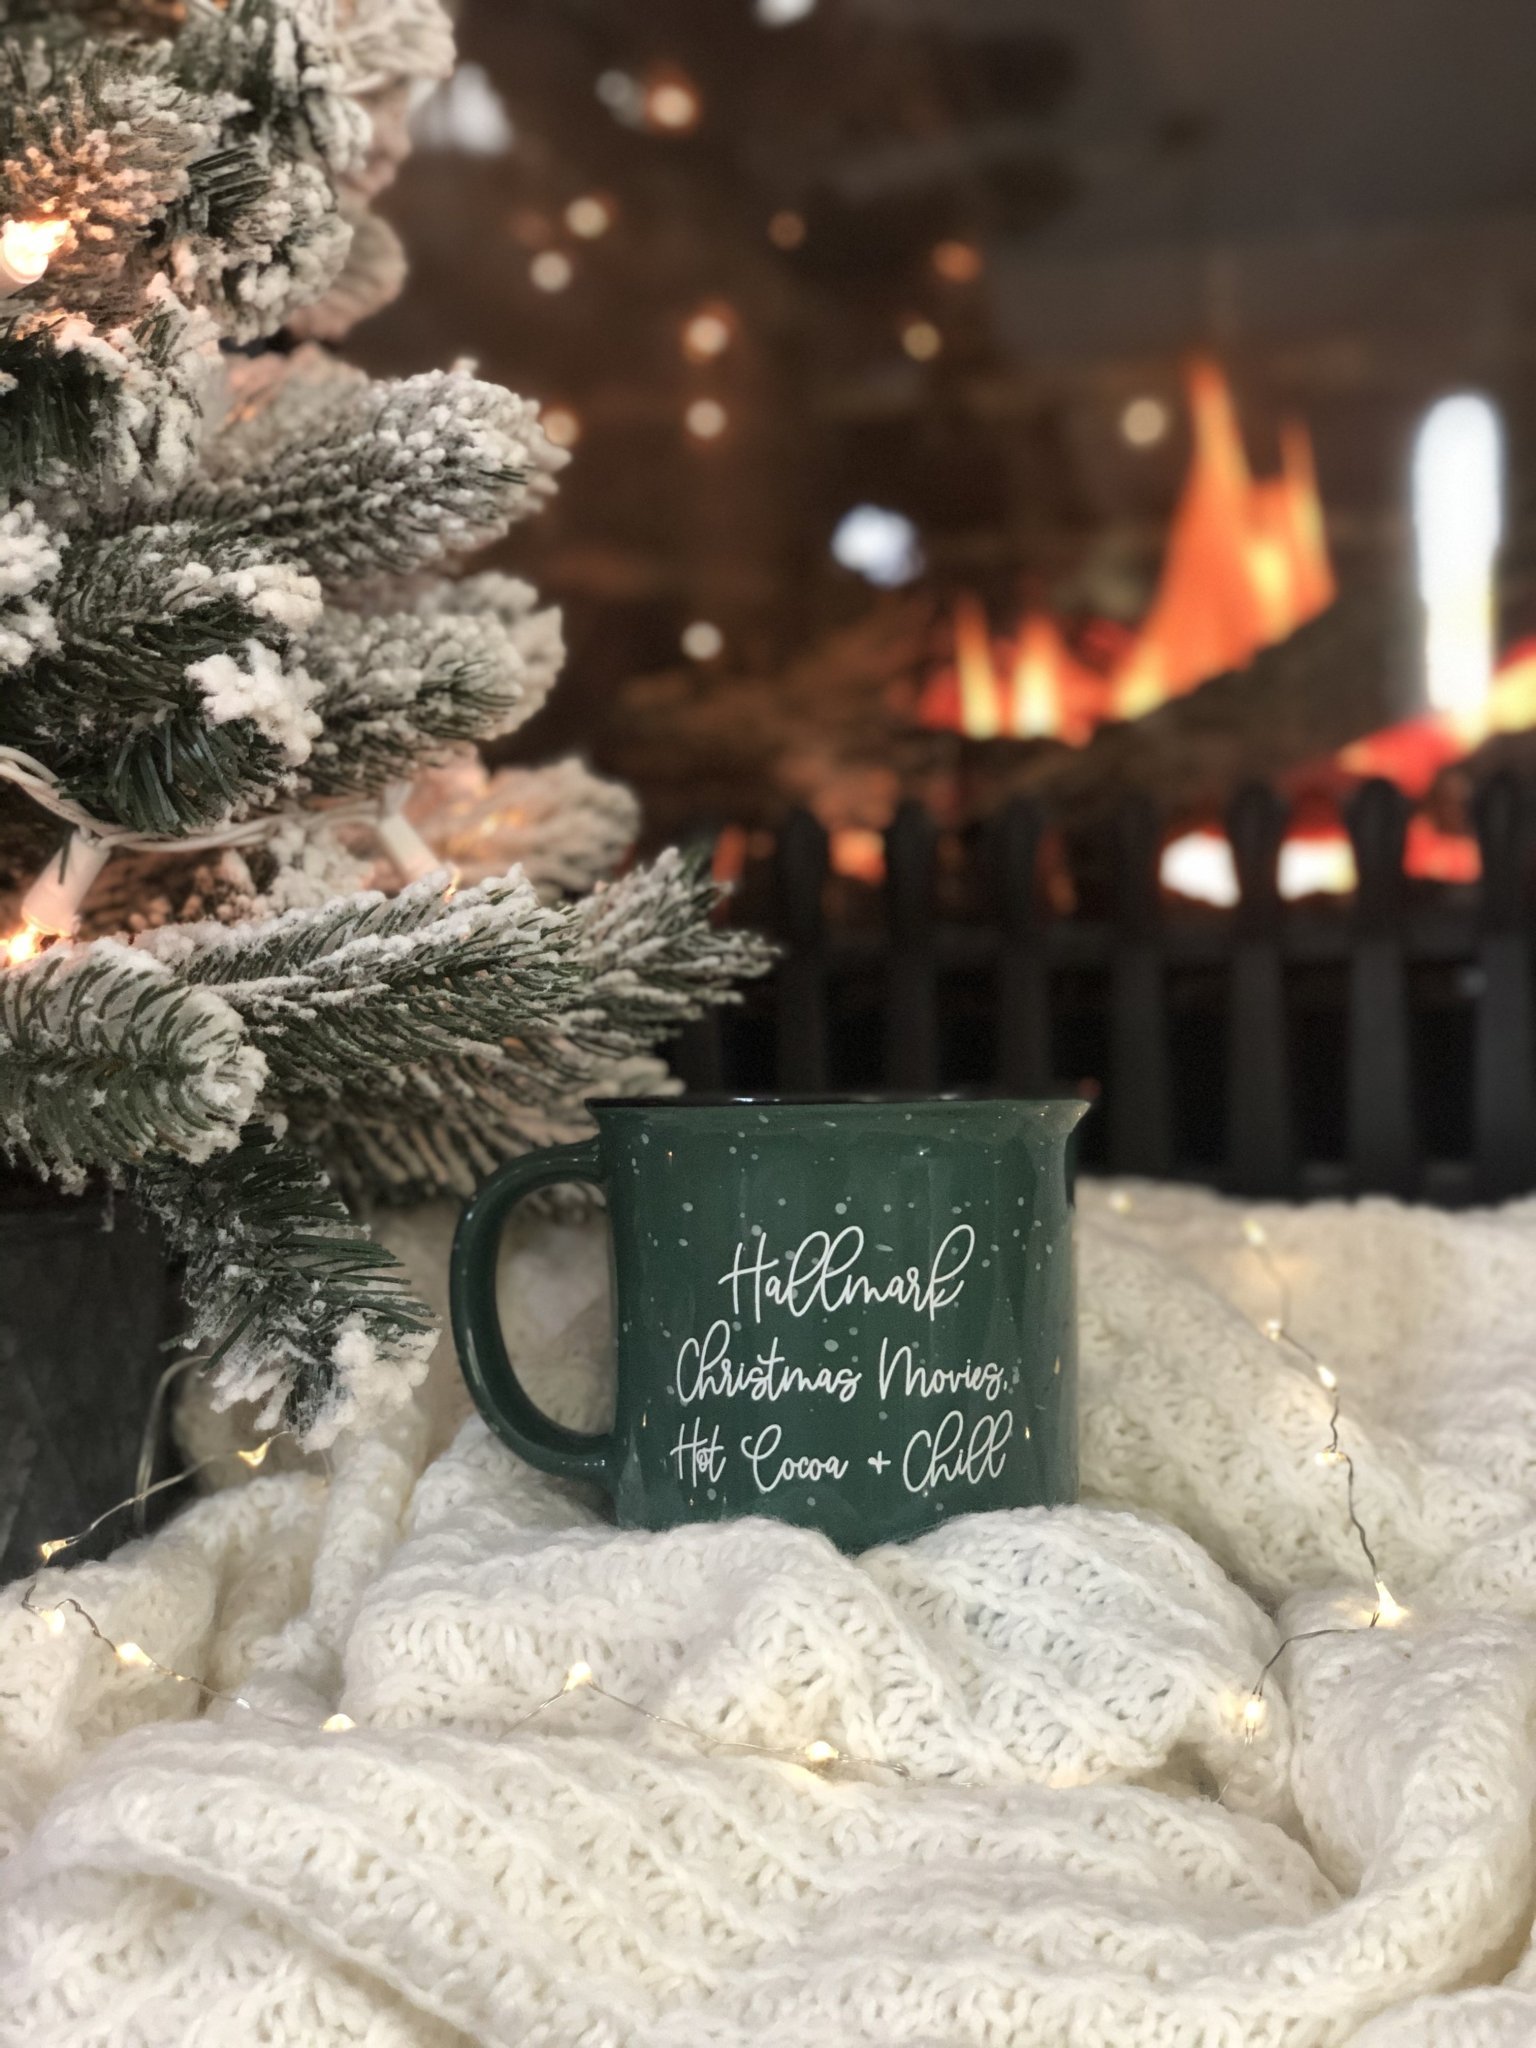 A mug that says "Hallmark Christmas Movies, Hot Cocoa & Chill" sits on a blanket in front of a Christmas tree and fireplace.